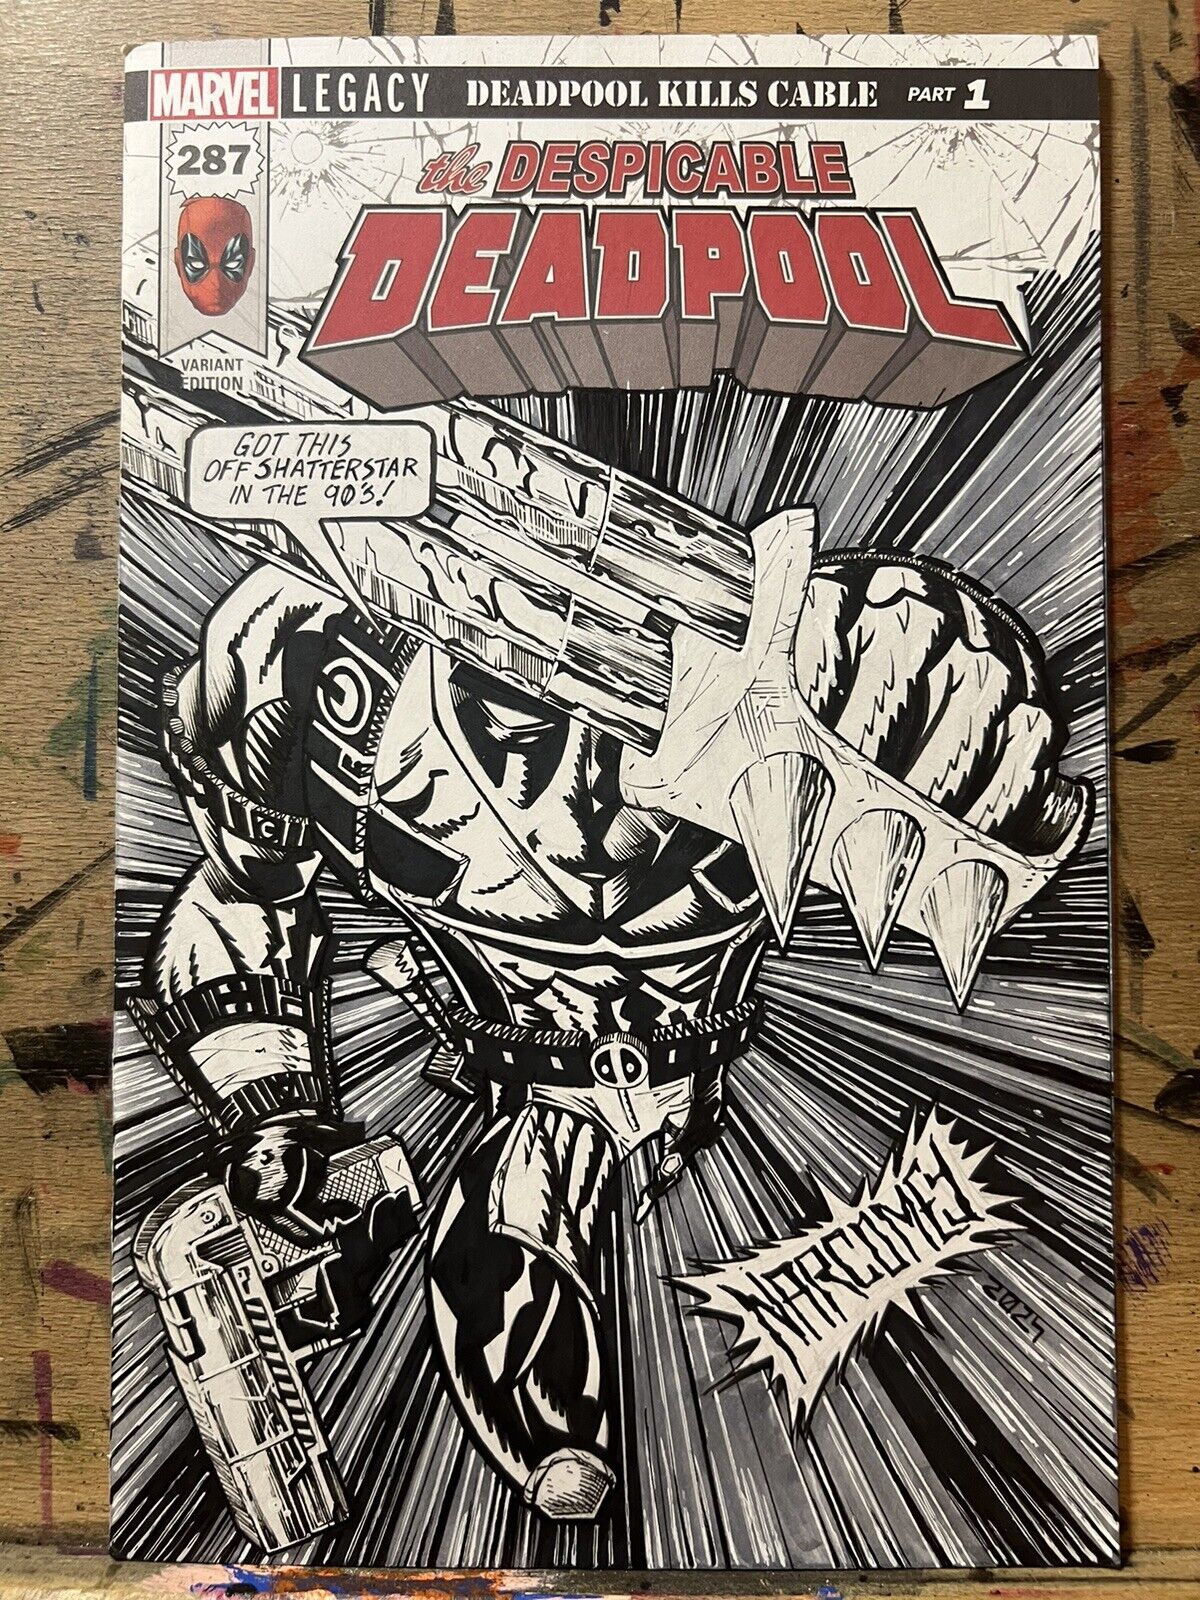 Despicable Deadpool 287 Sketch Cover art by NARCOMEY